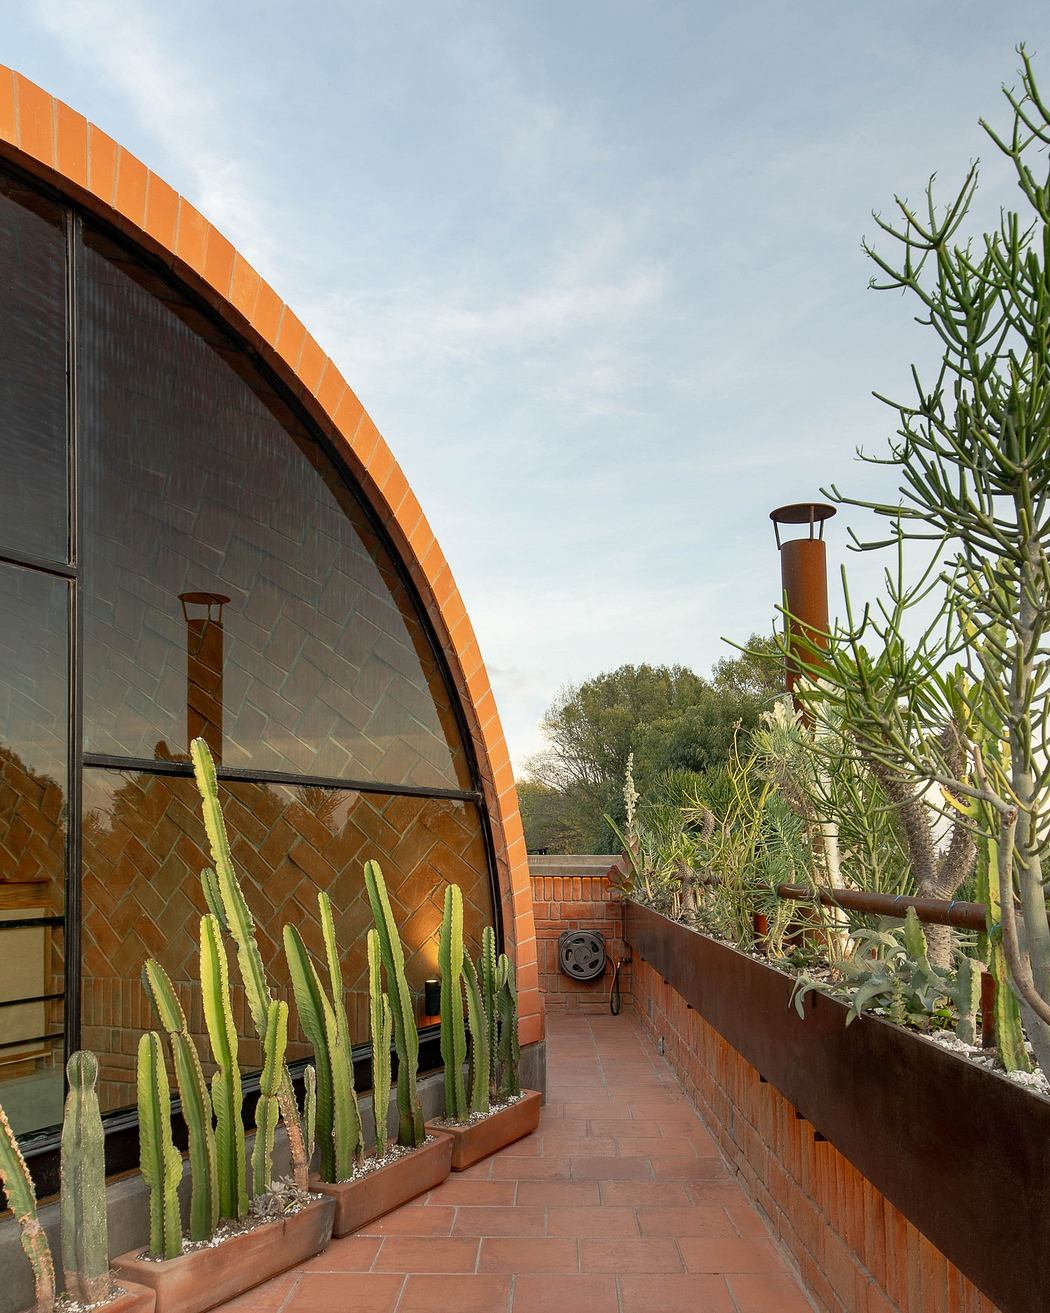 Curved building facade with tile work and rooftop garden with cacti.